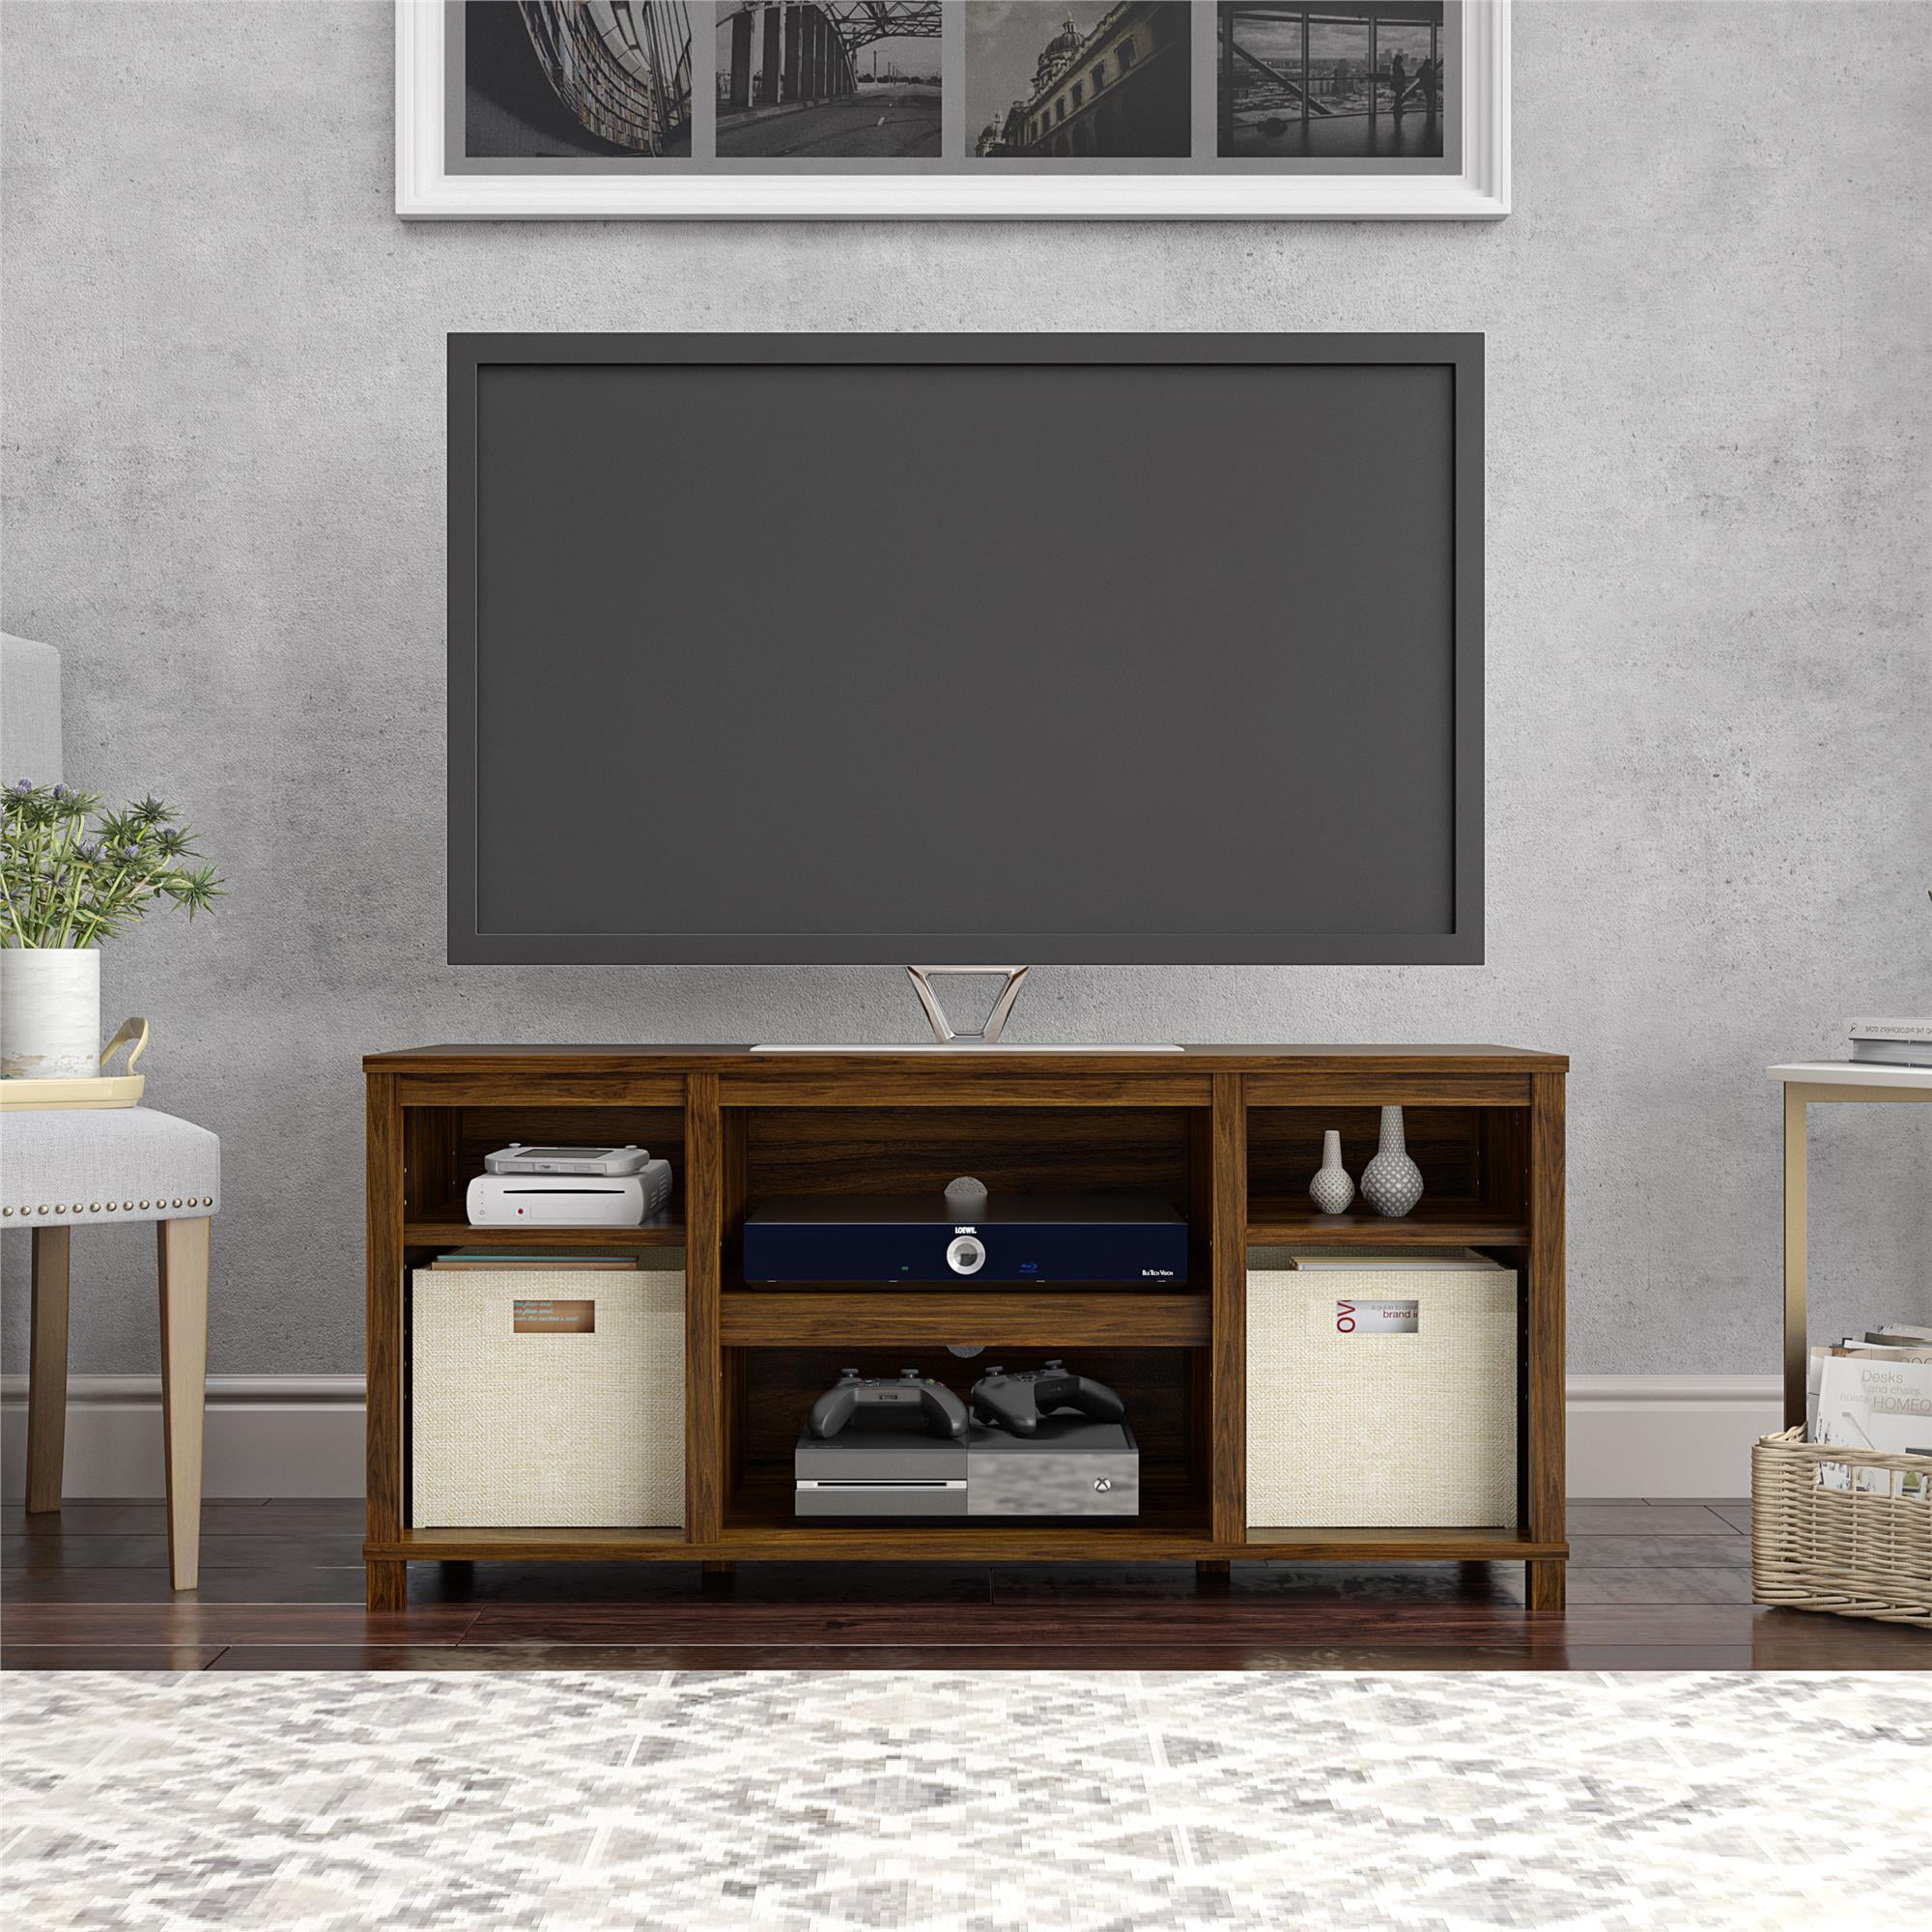 Tv Stand For 50 In Tv Sale, 60% OFF | www.pegasusaerogroup.com